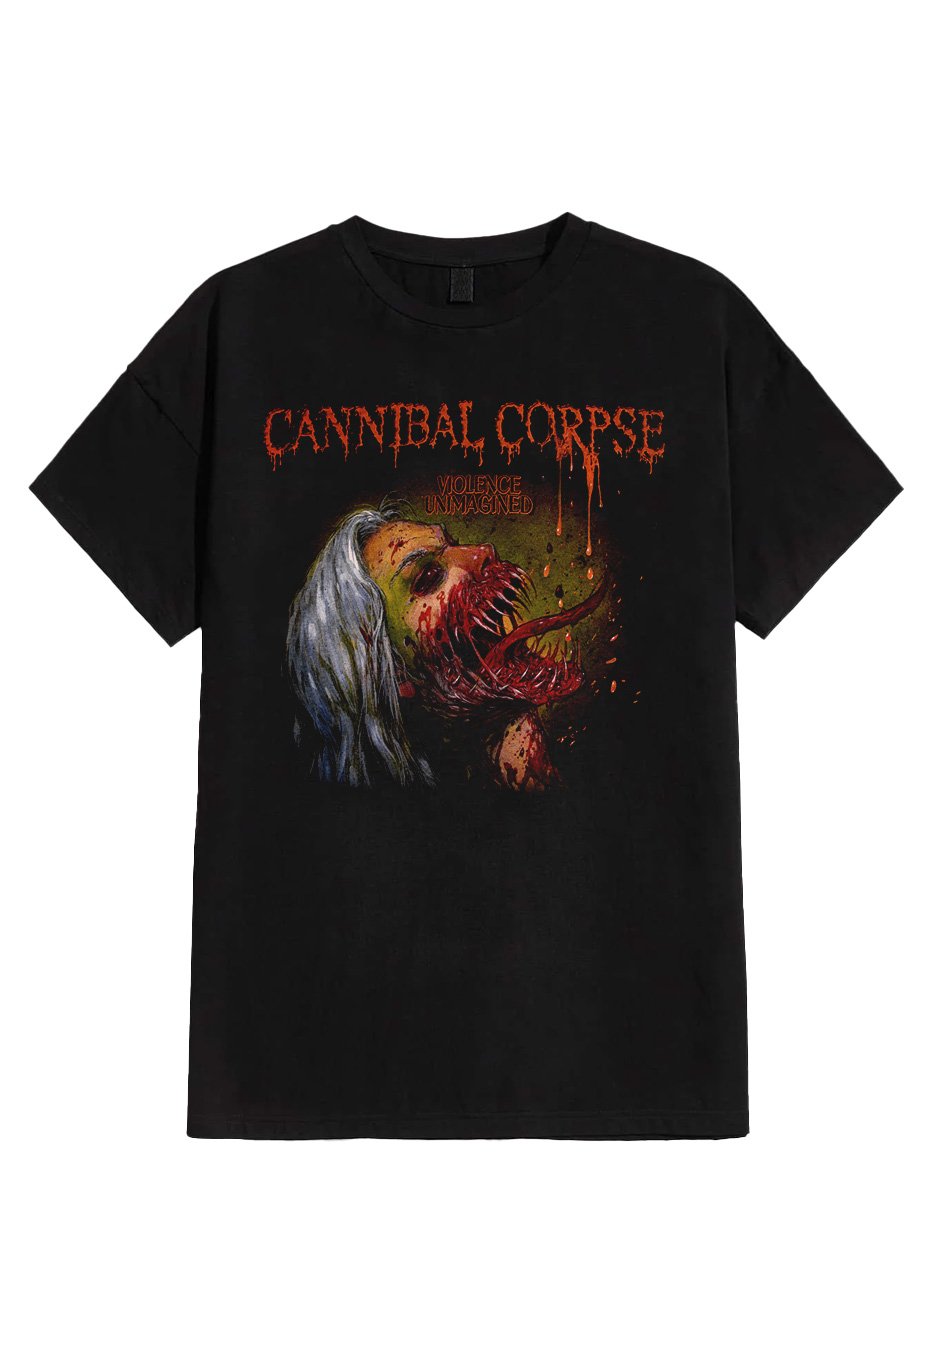 Cannibal Corpse - Violence Unimagined Cover Black - T-Shirt